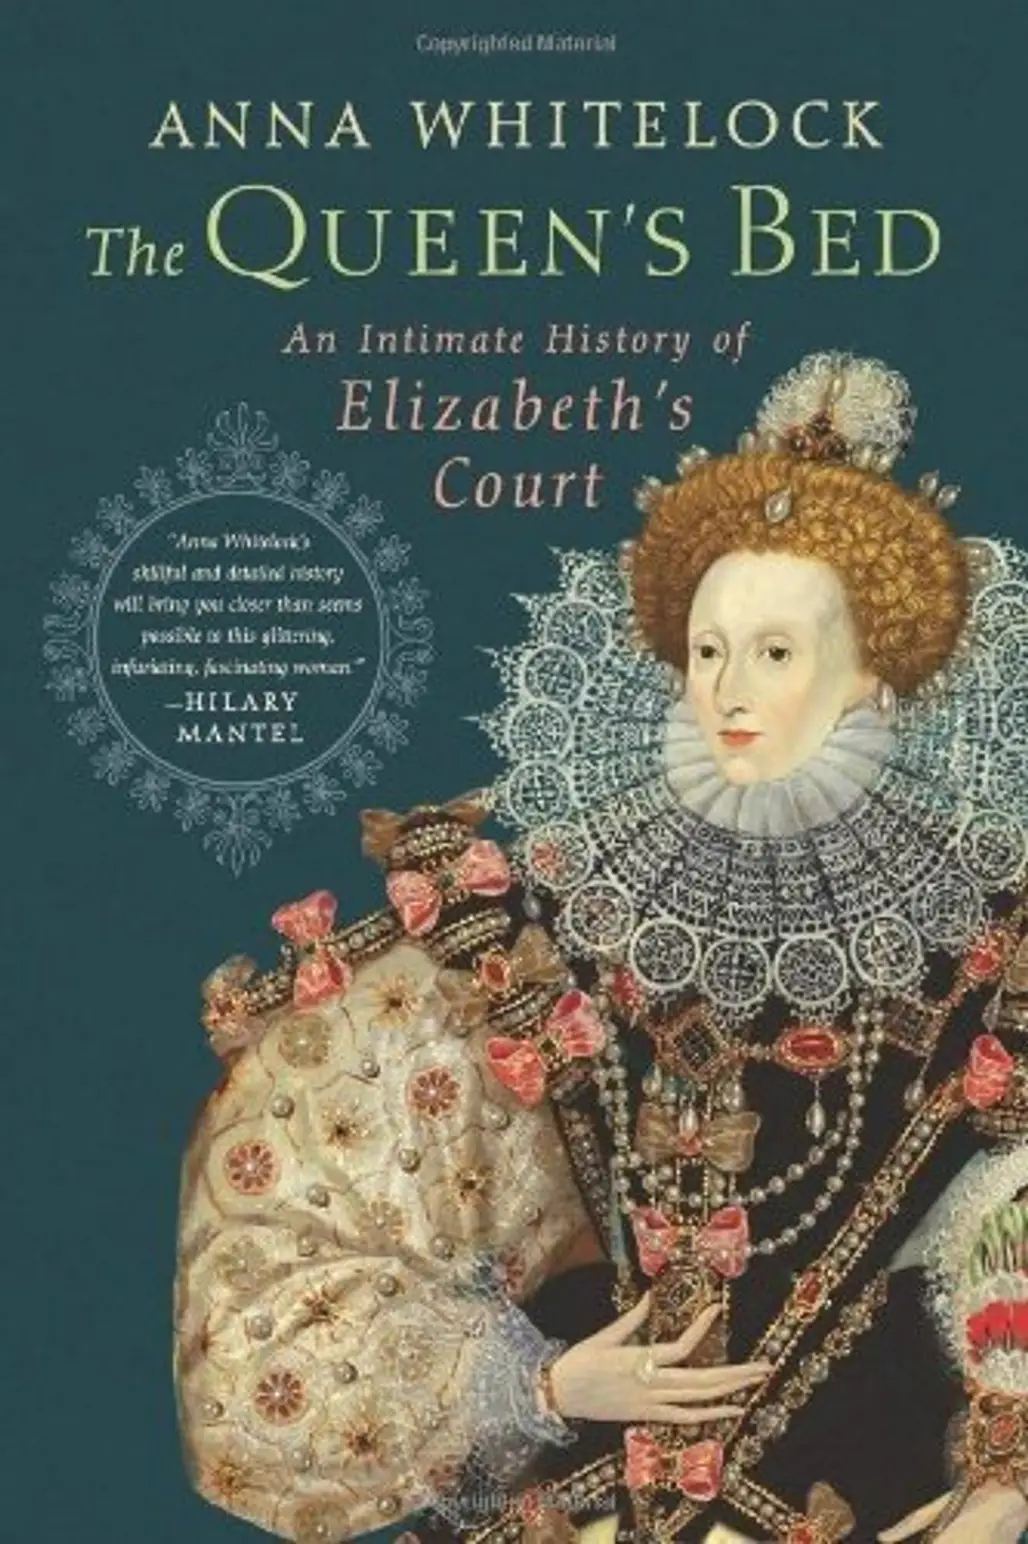 The Queen's Bed: an Intimate History of Elizabeth's Court (Anna Whitelock)